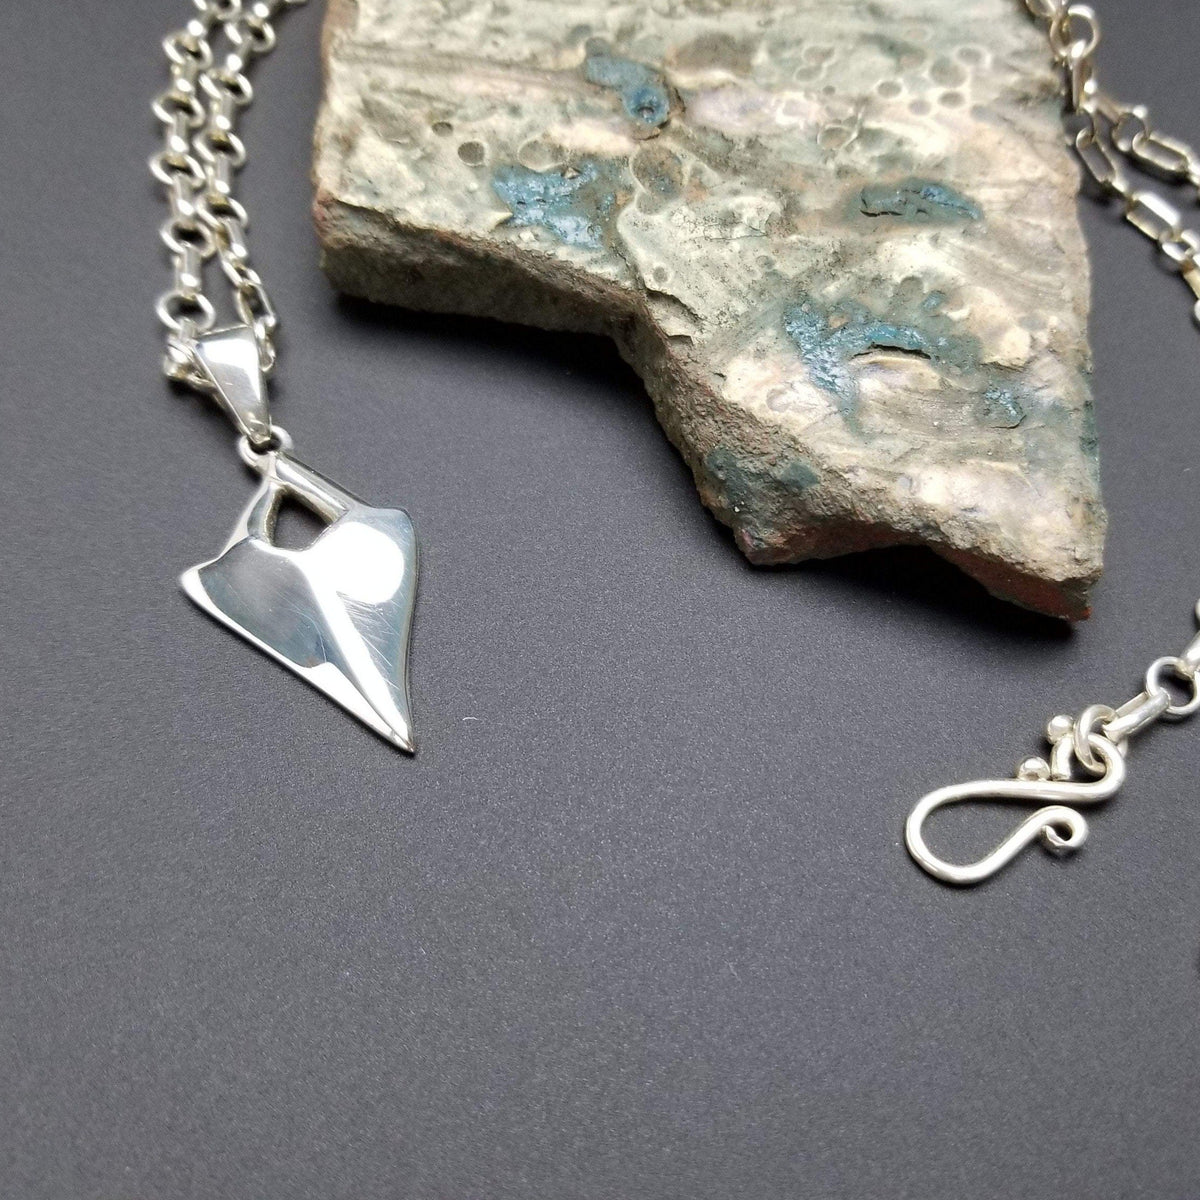 Large link sterling silver ring with shark tooth pendant